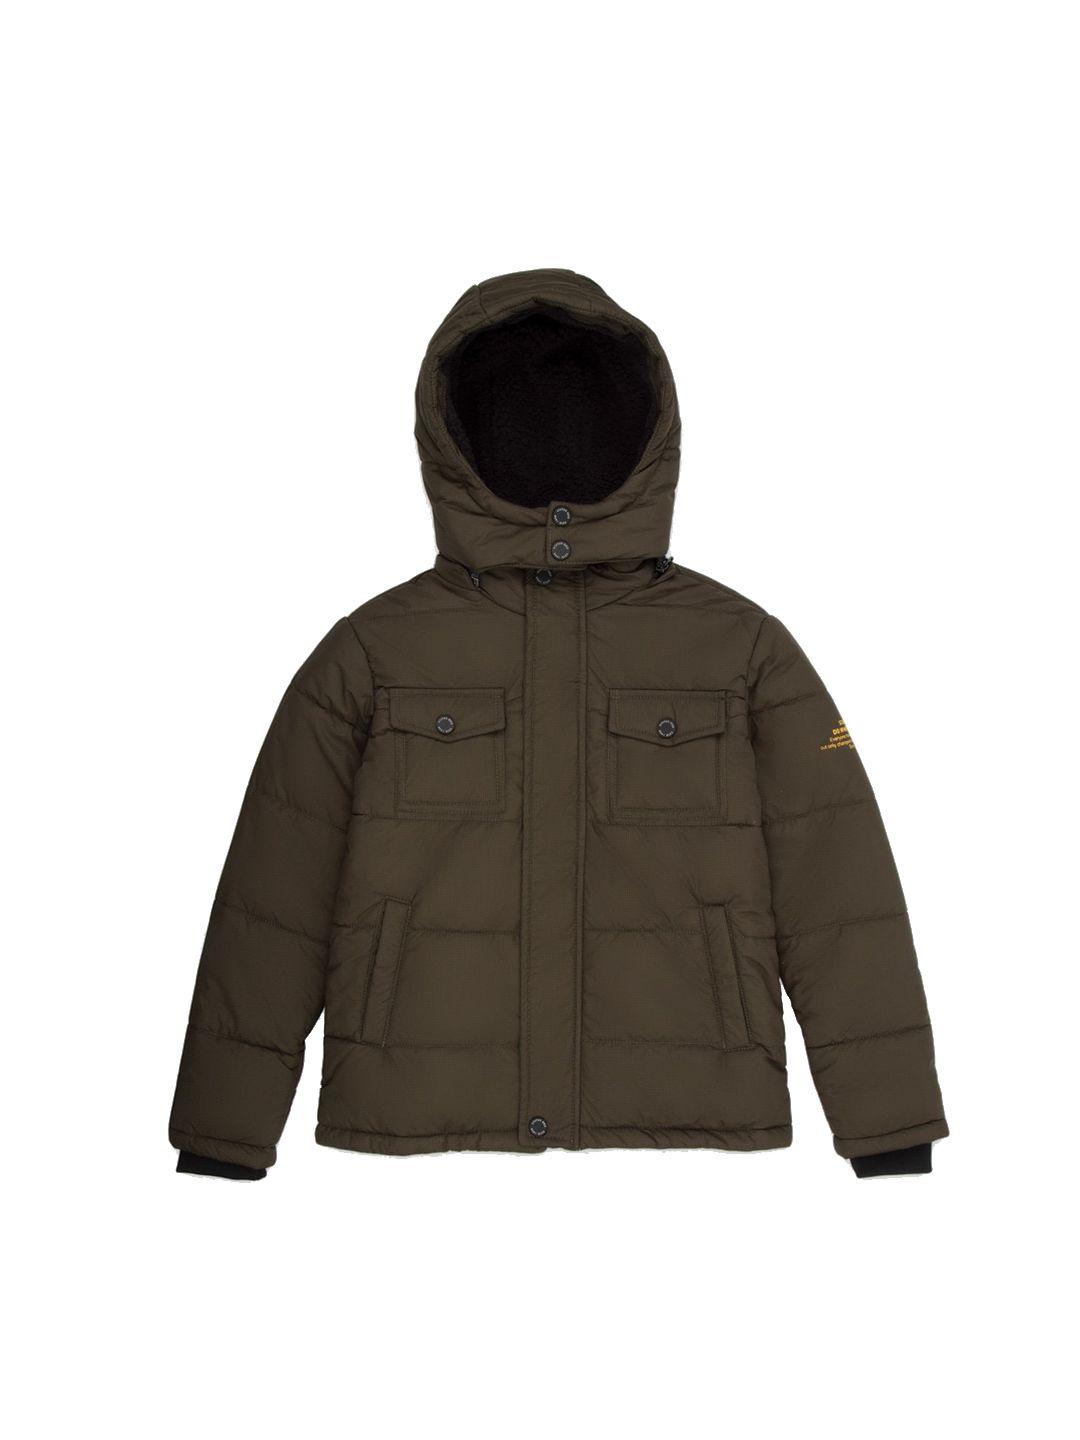 Status Quo Boys Olive Green Padded Jacket